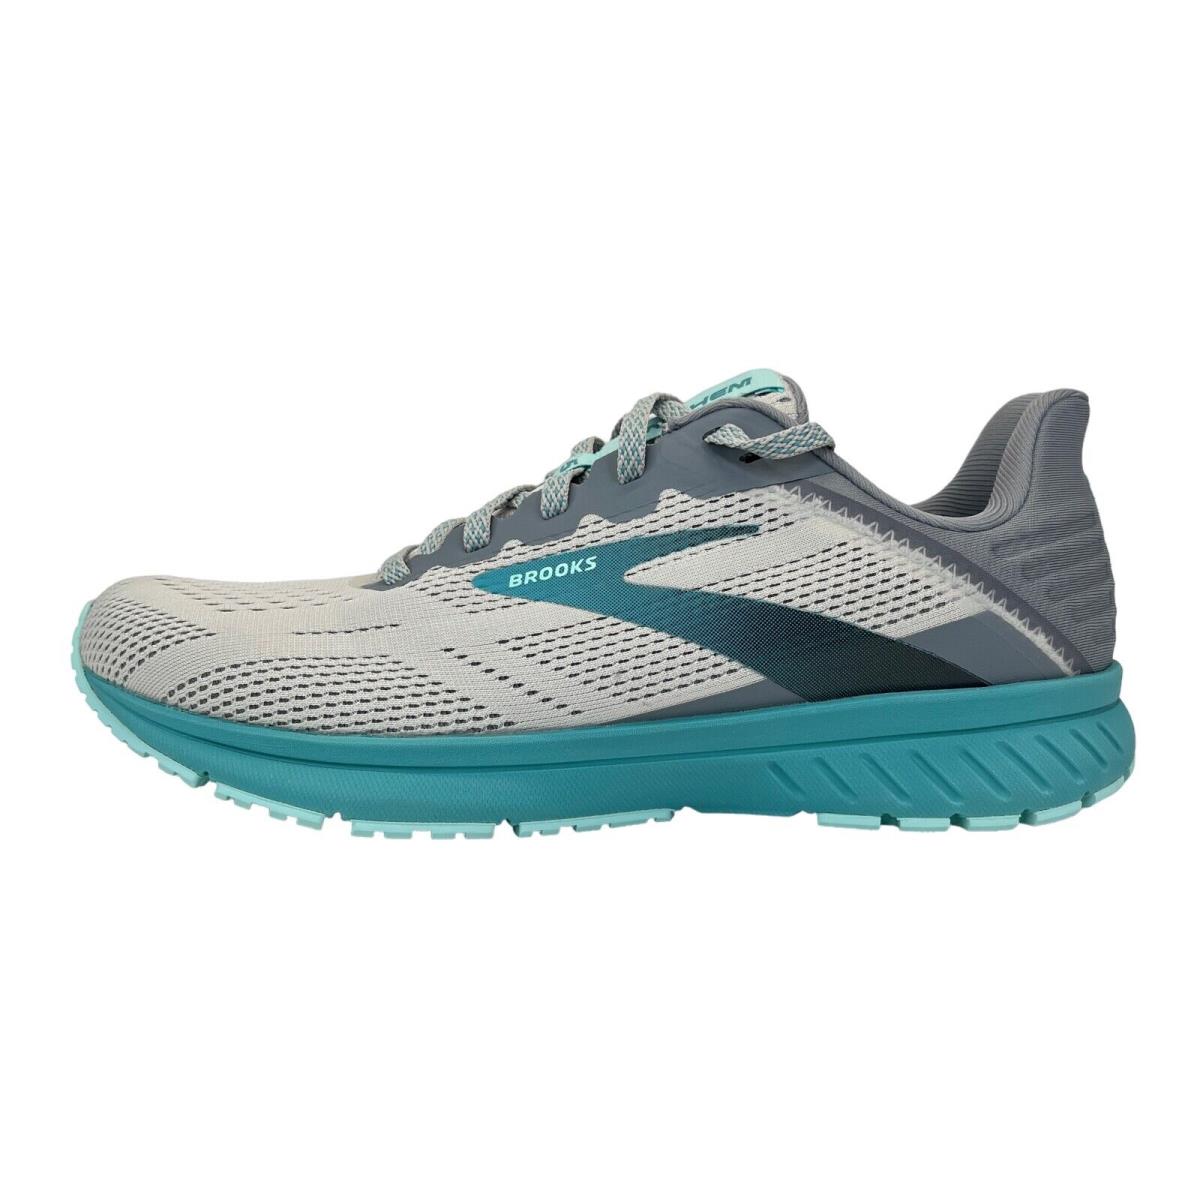 Brooks Anthem 5 Grey Silver Teal Aqua Women`s Road Running Shoes Size 7.5